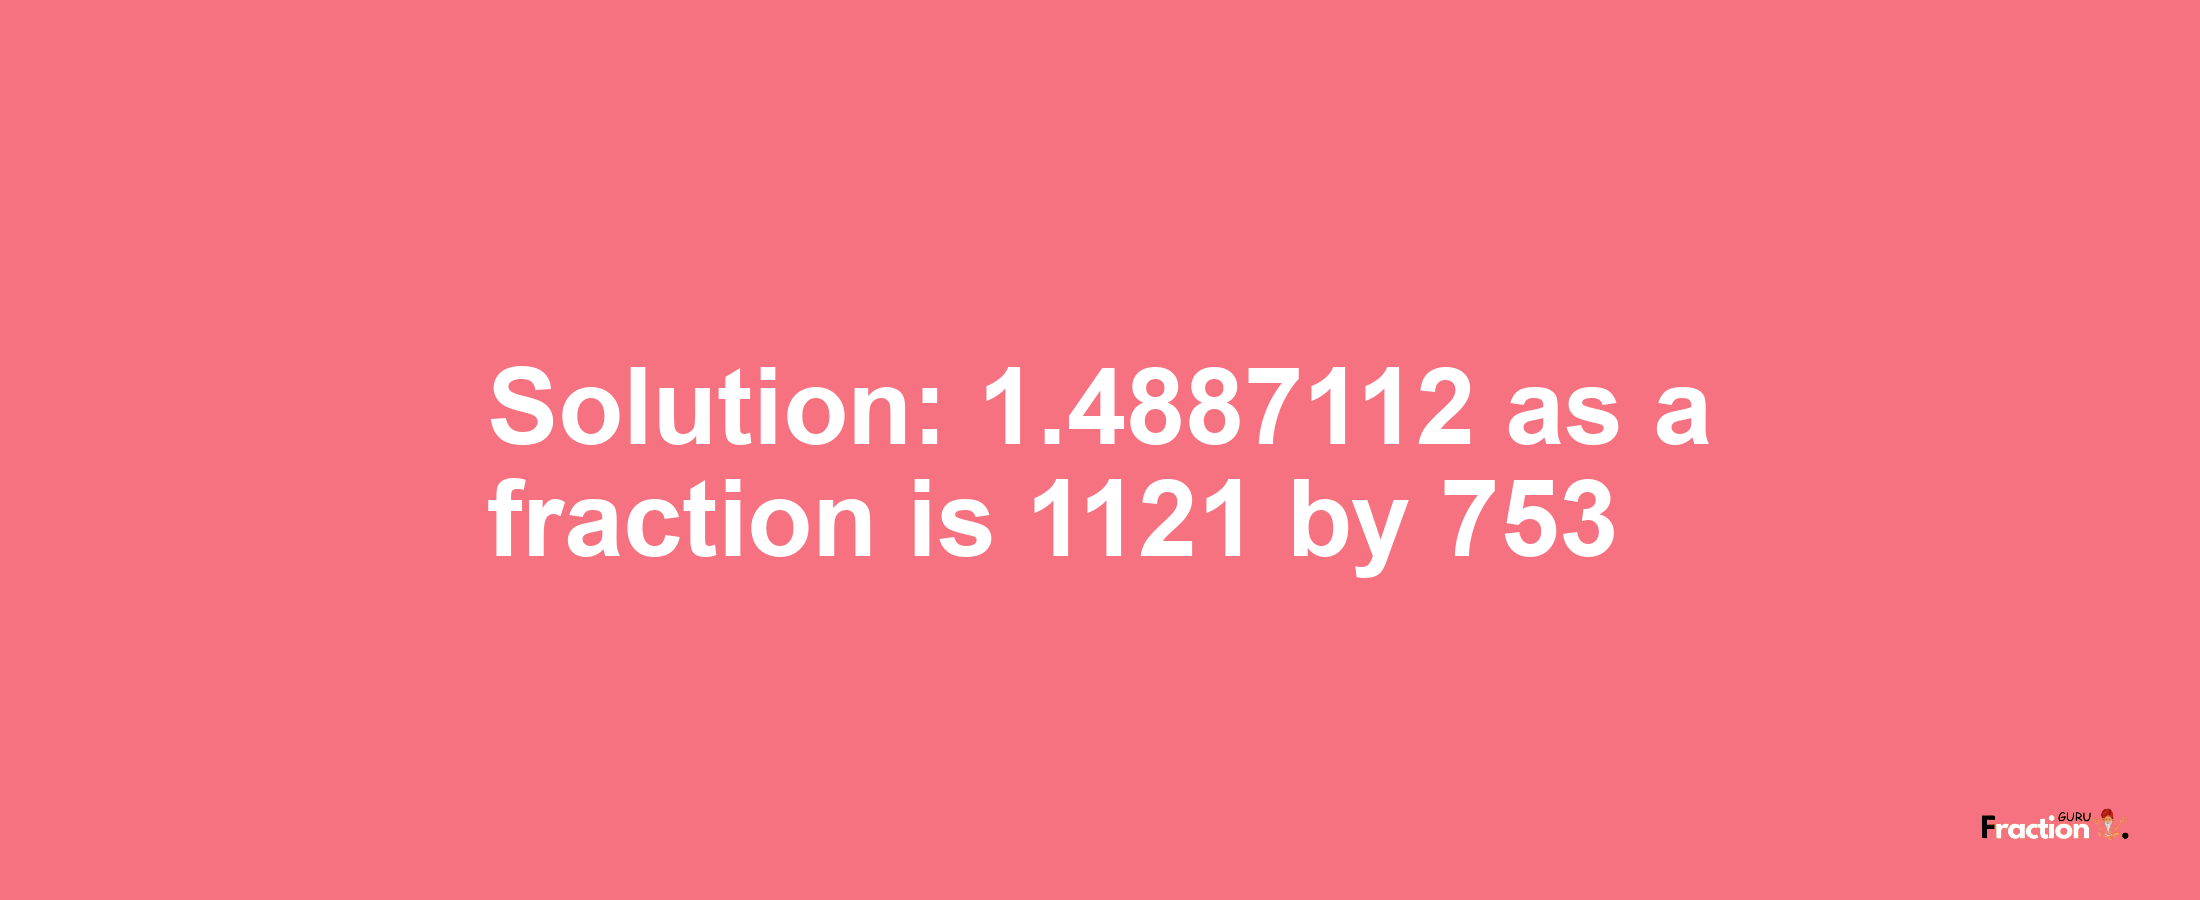 Solution:1.4887112 as a fraction is 1121/753